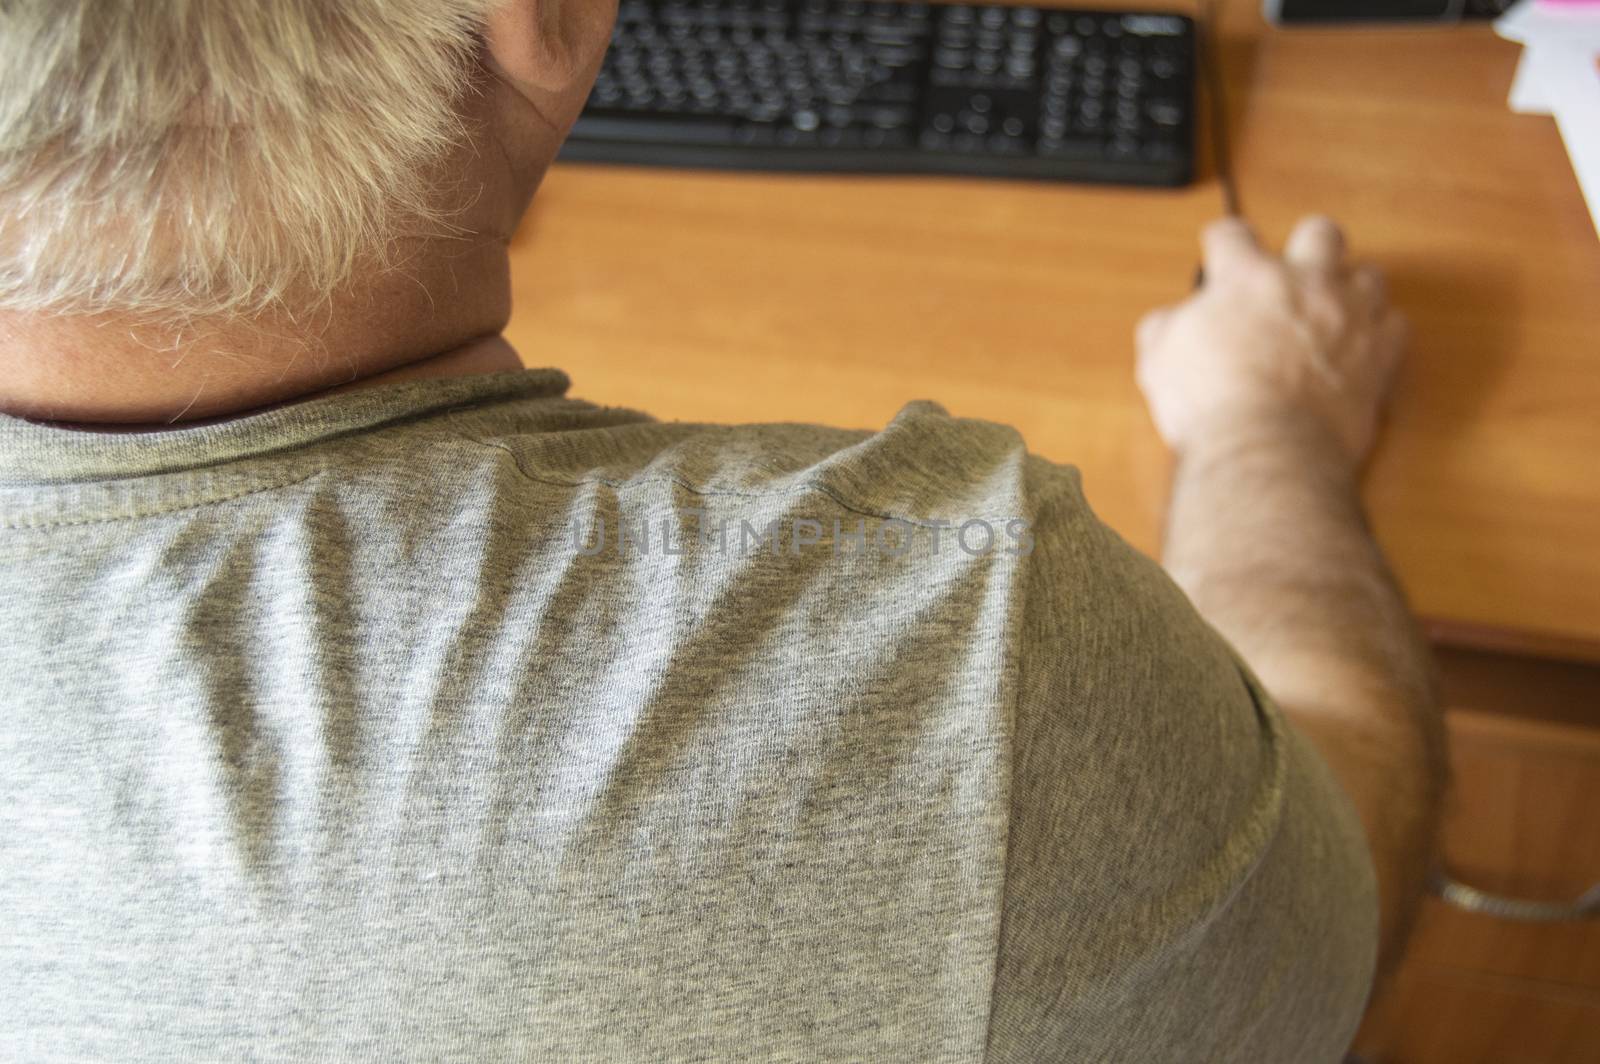 An elderly gray-haired man uses a computer mouse, work at home for the disabled, training pensioners to work on a PC, a view from the back by claire_lucia